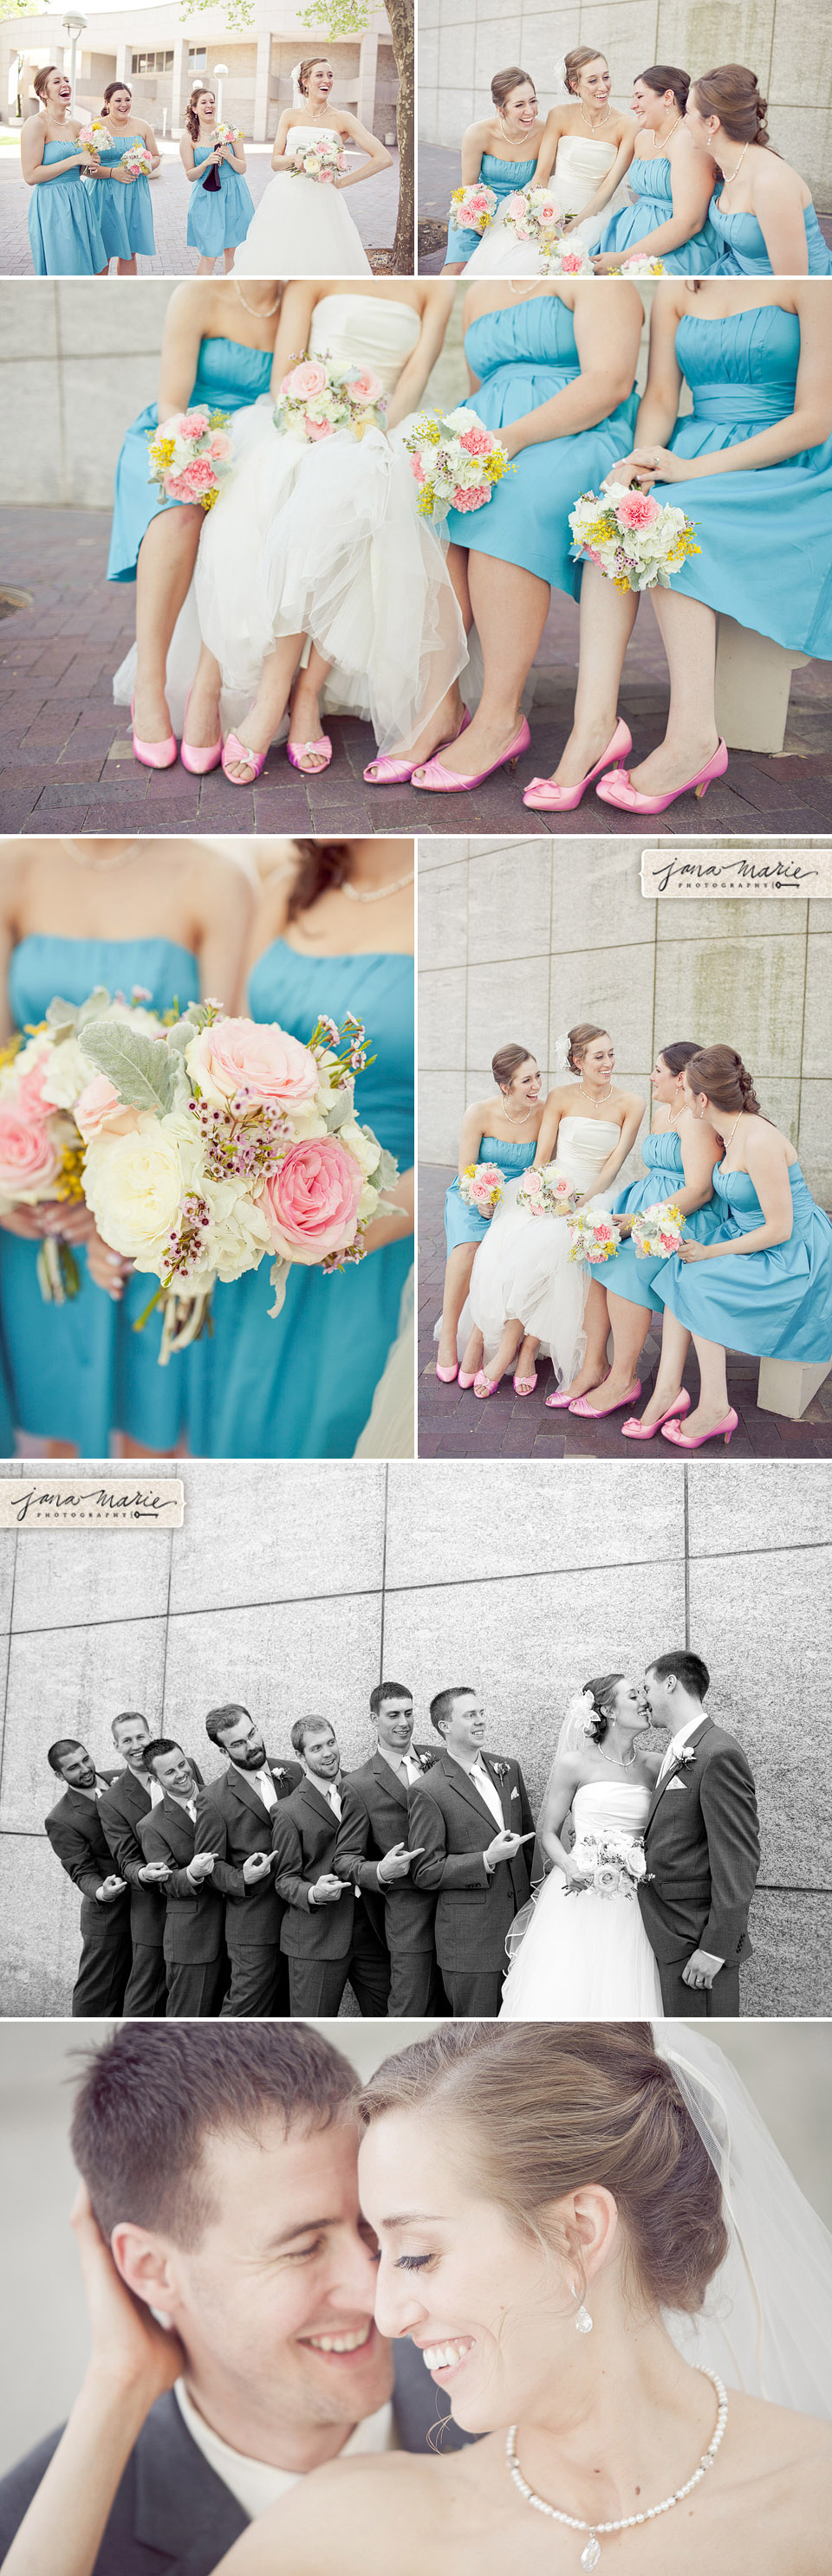 Girls, Pink shoes, bouquets, traditions, Creative weddings, Budget bride, Jana Marie, Kiss,